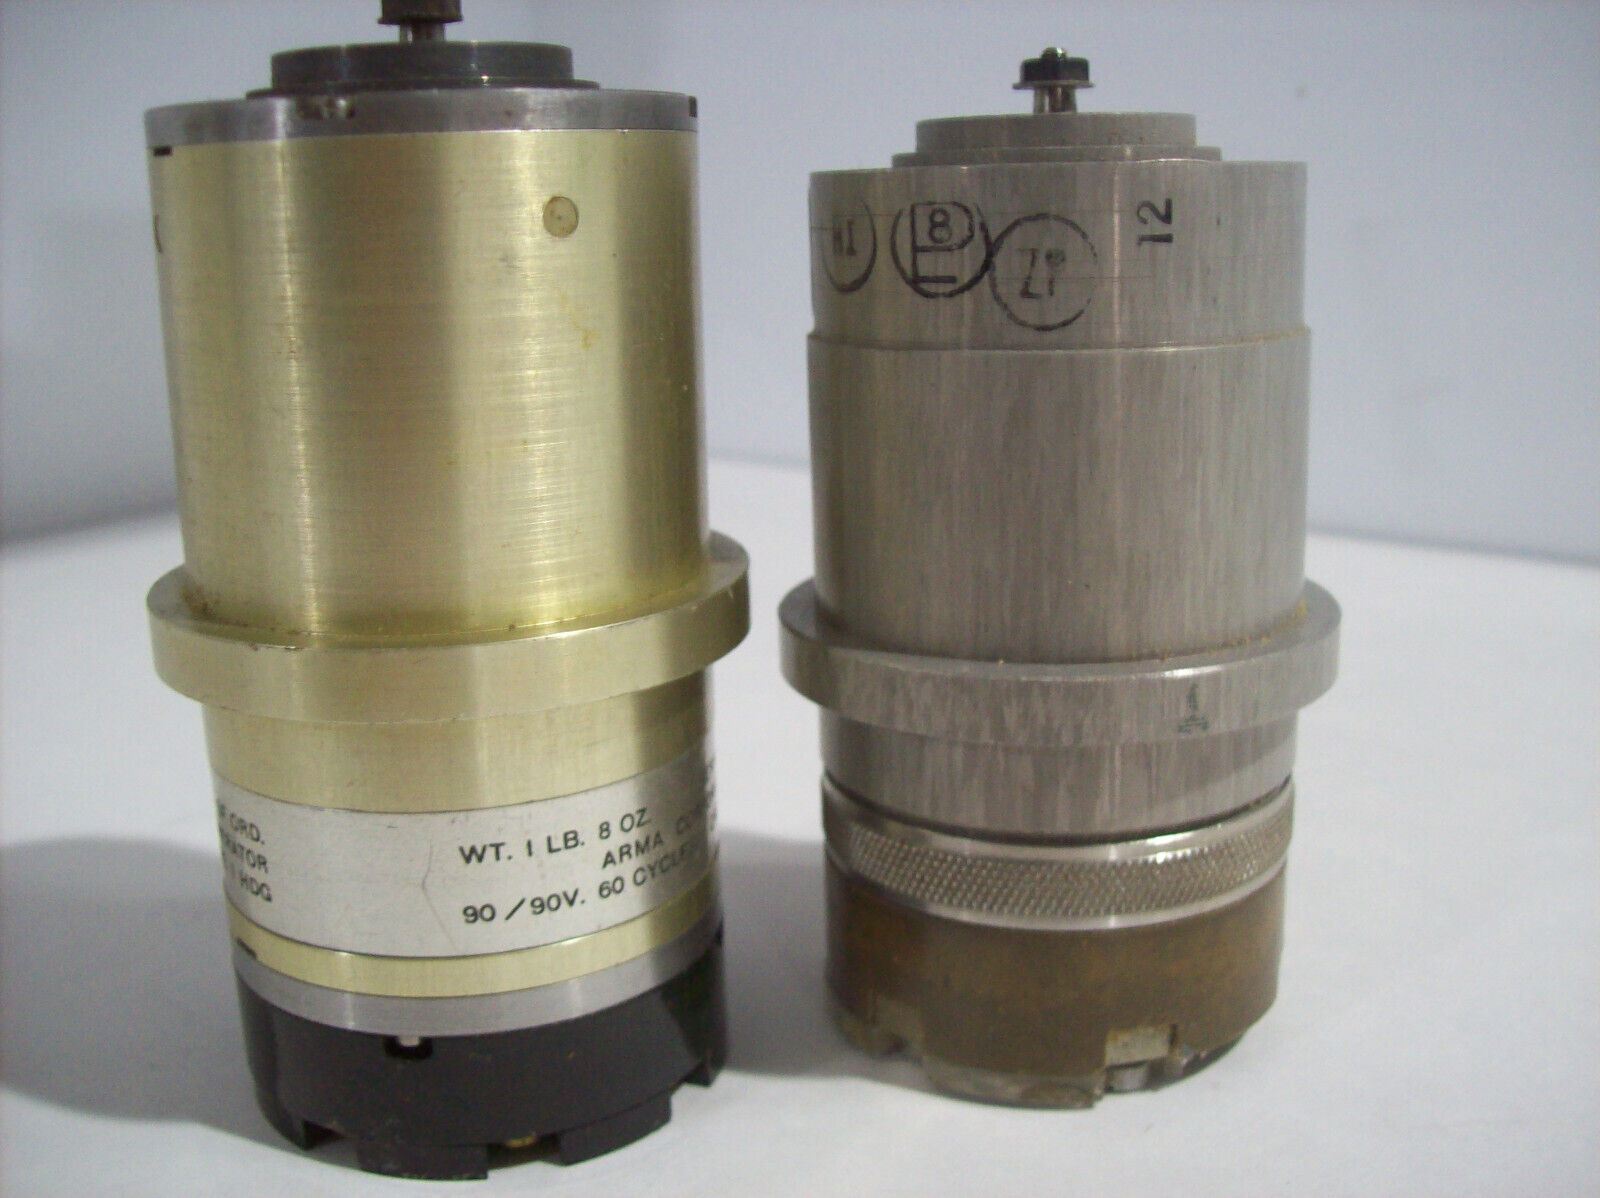 Pair US NAVY SYNCHRO DIFFERENTIAL GENERATOR and SYNCHRO DIFFERENTIAL TRANSMITTER